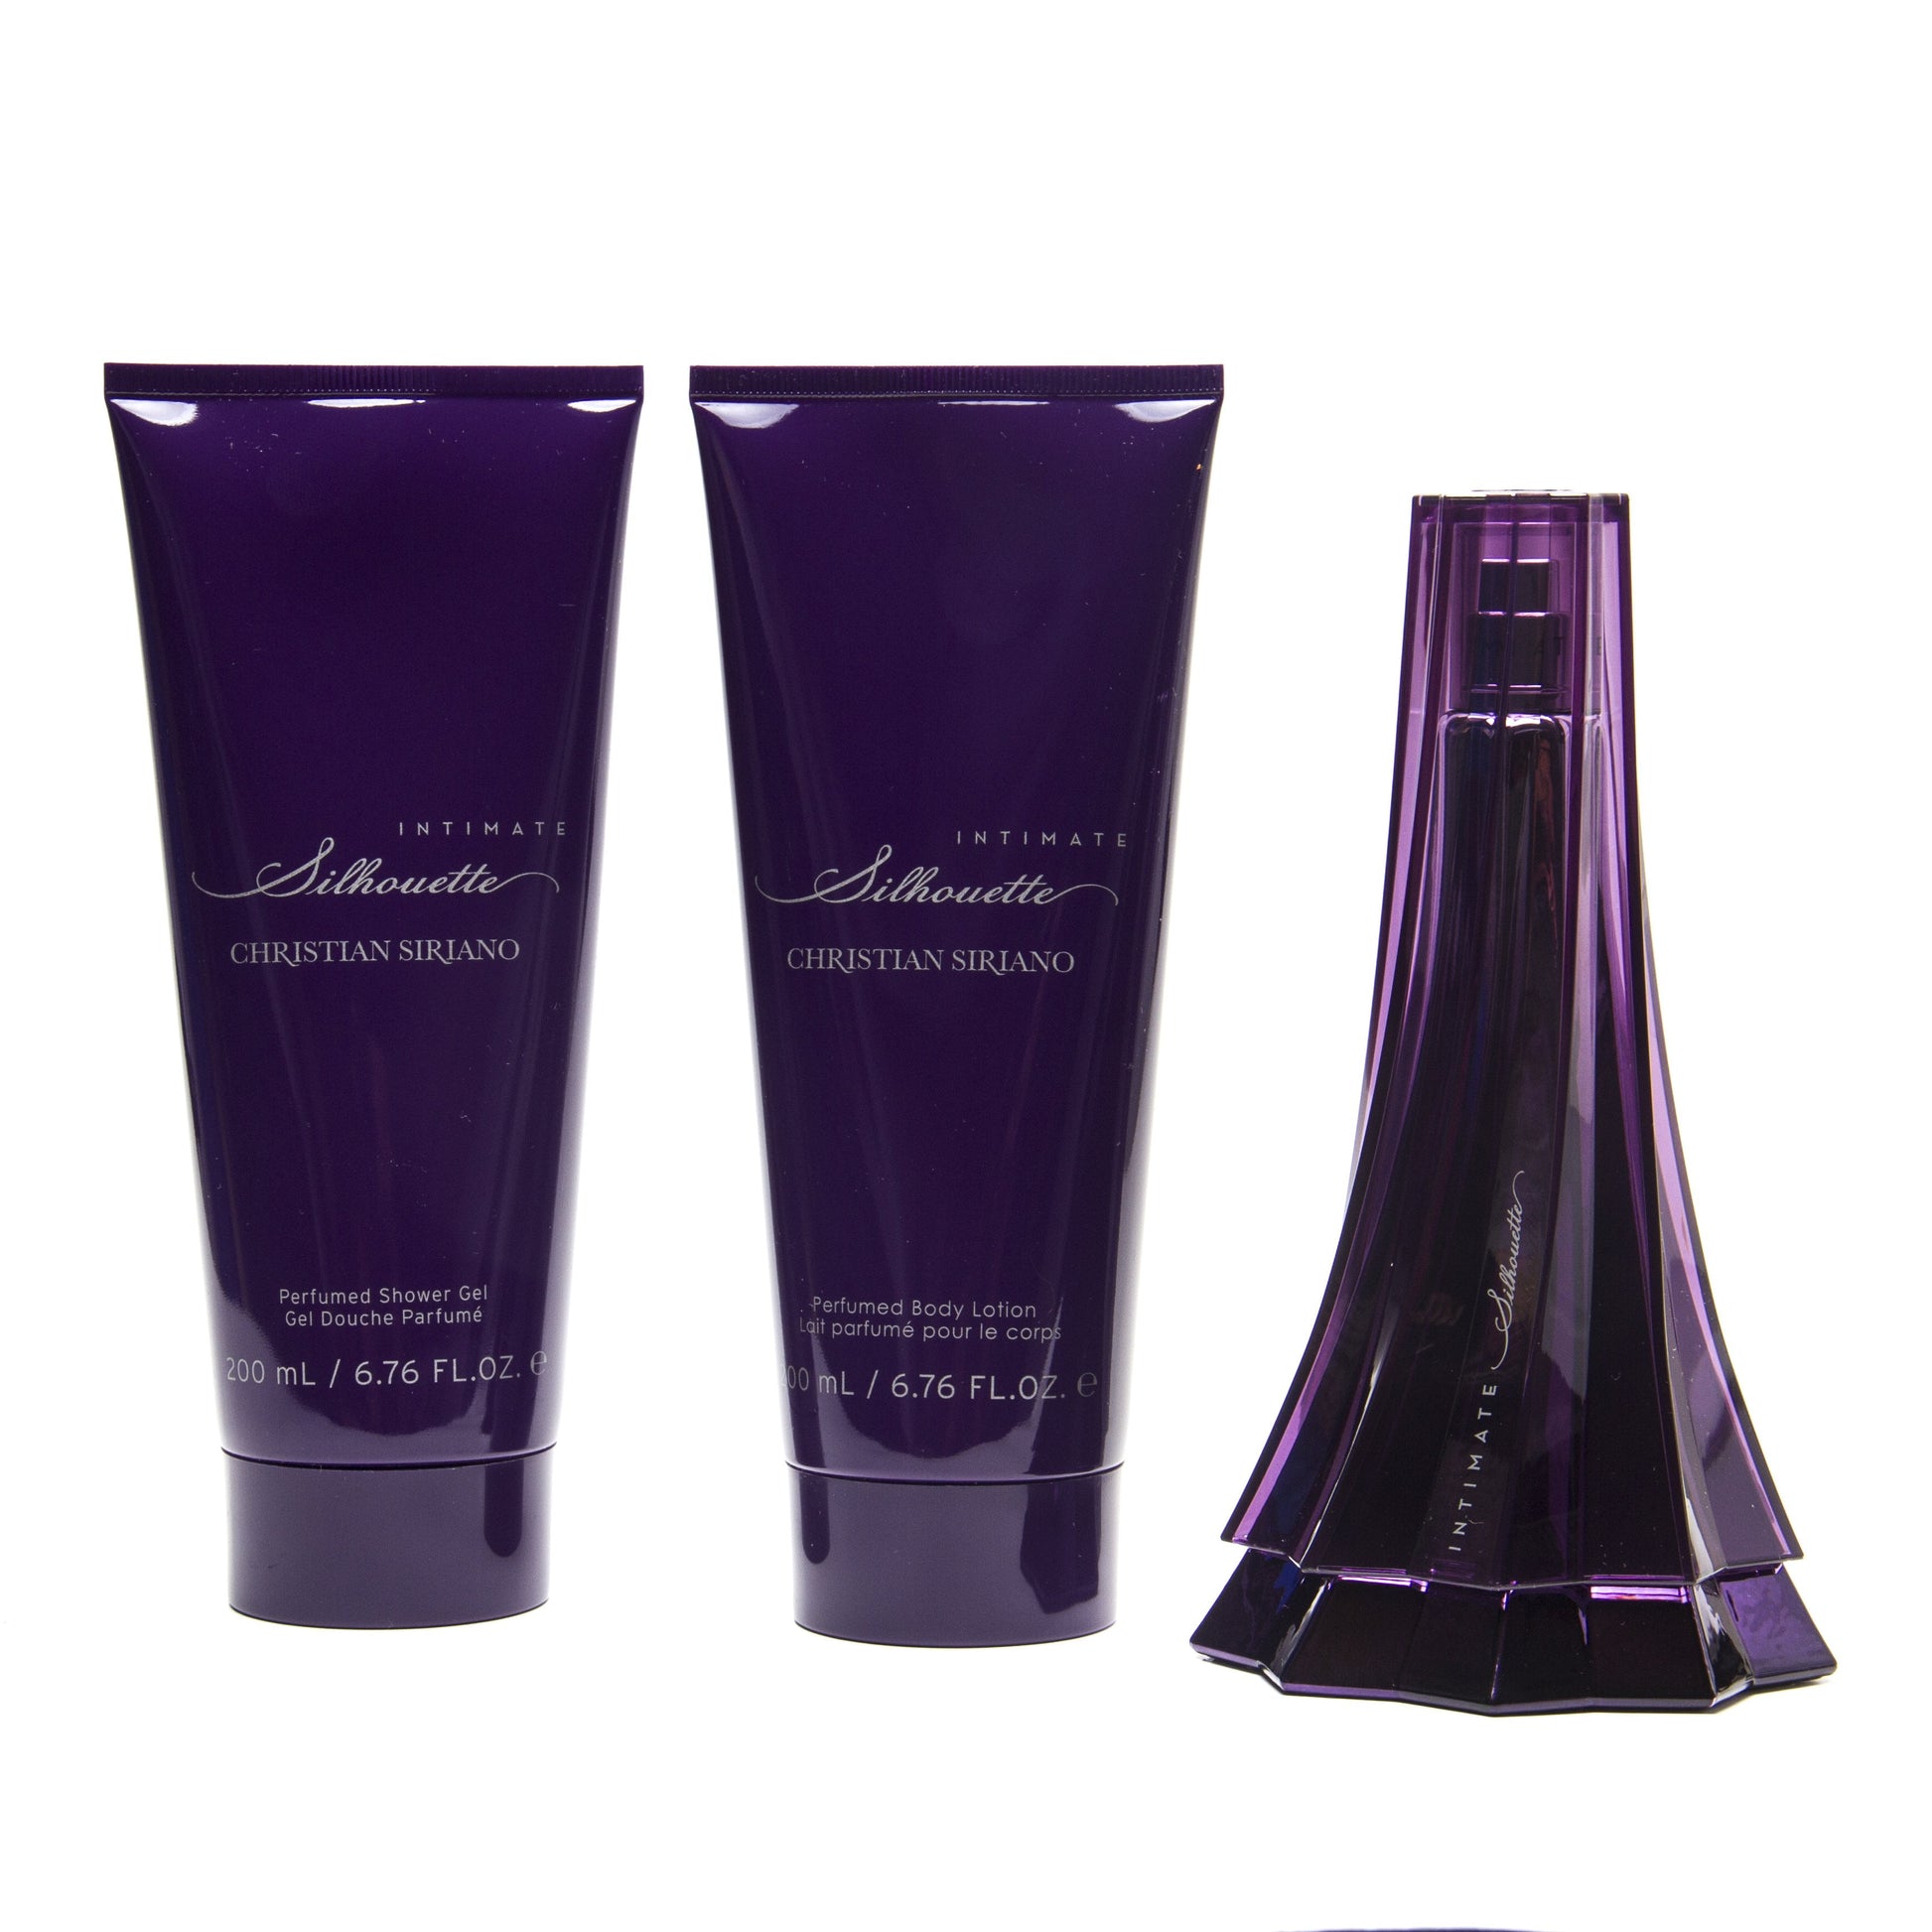 Intimate Silhouette Set for Women by Christian Siriano, Product image 2